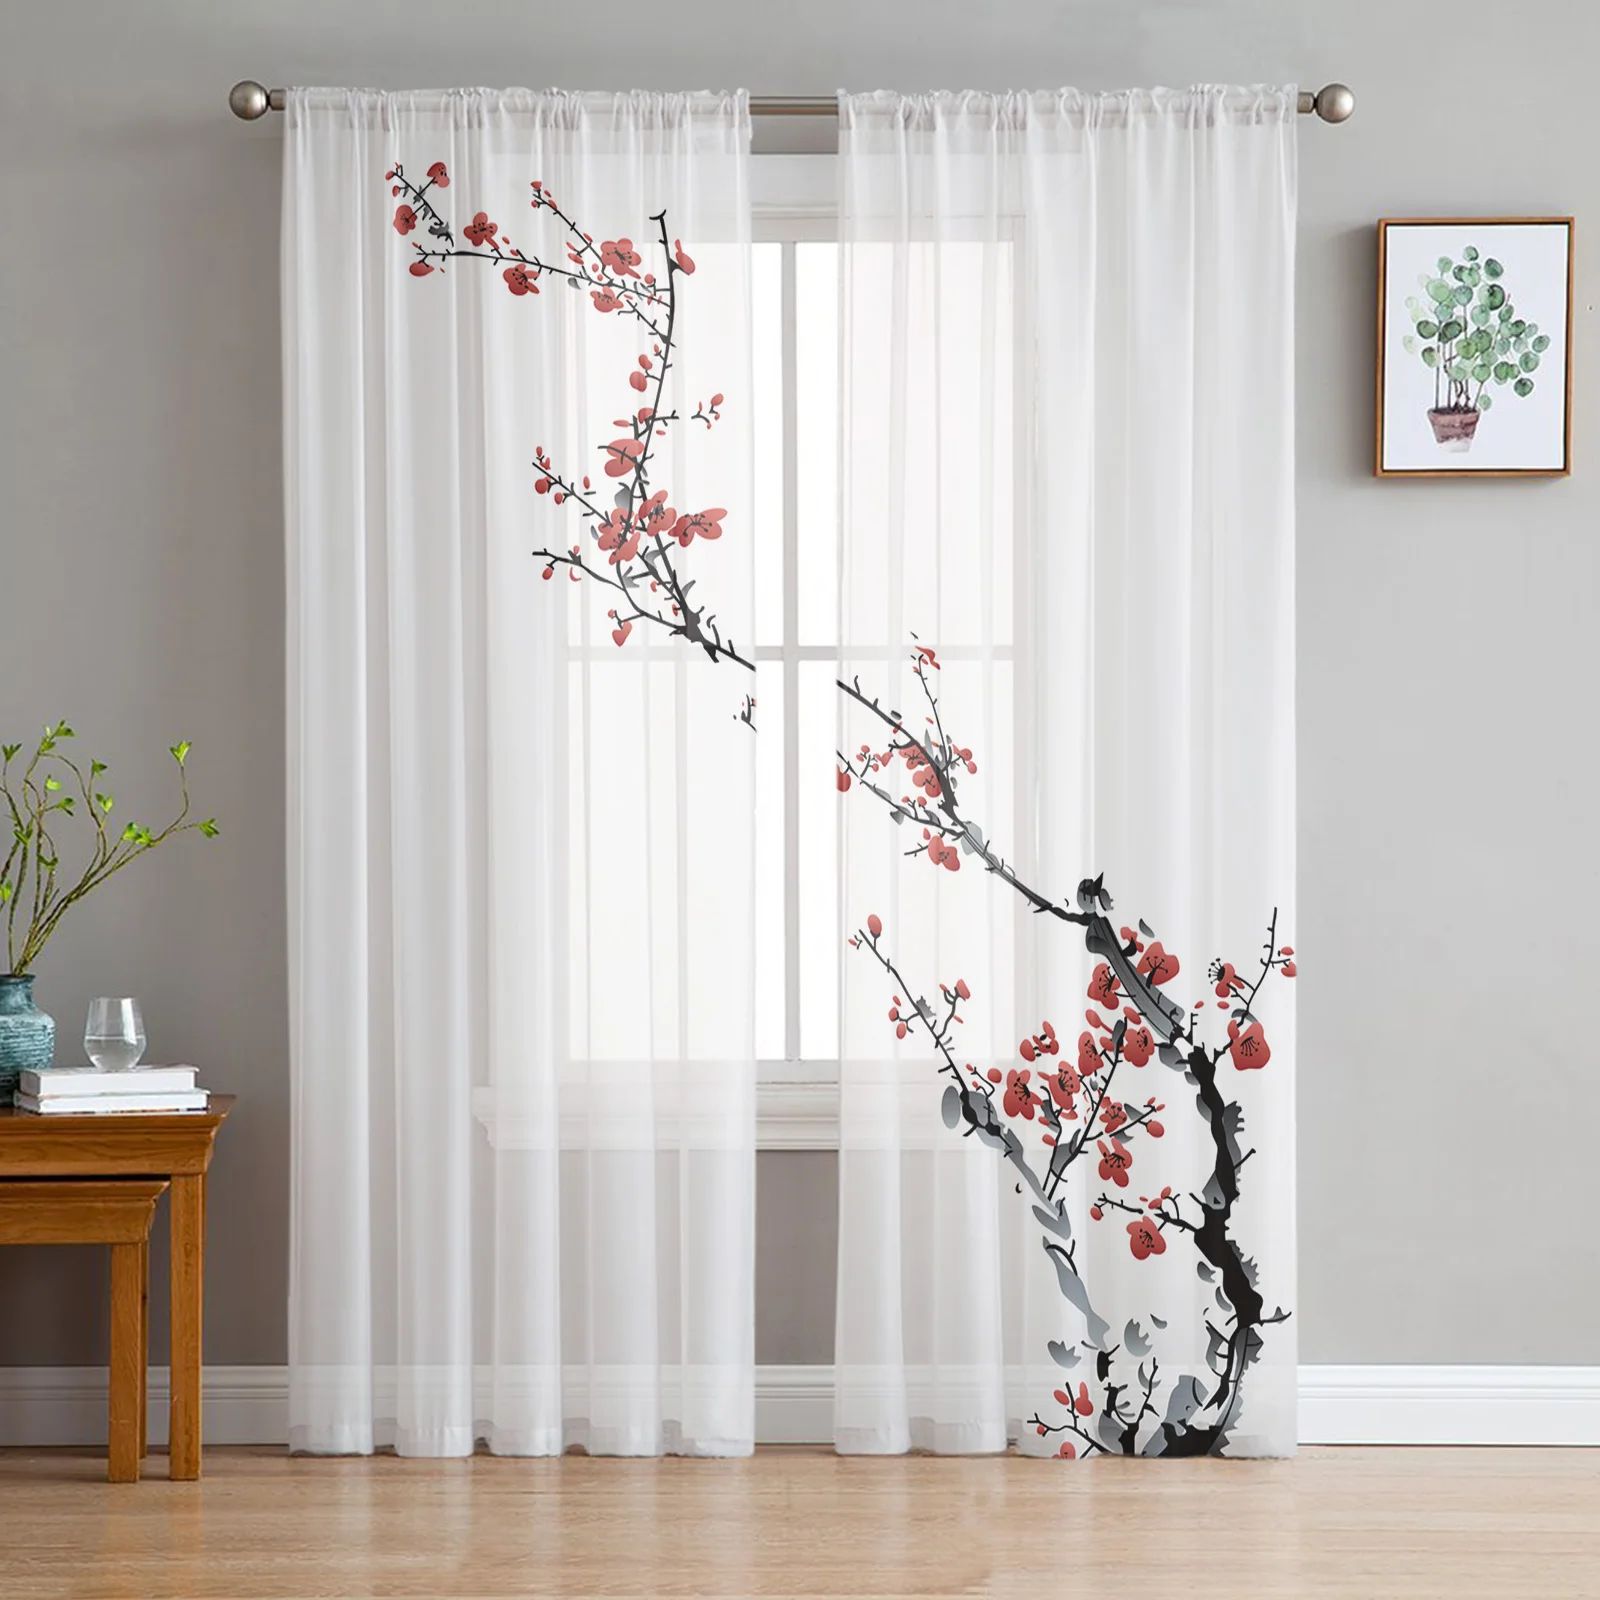 

Plum Blossom Ink Chinese Painting Tulle Sheer Window Curtains for Living Room the Bedroom Voile Decorative Curtains Drapes